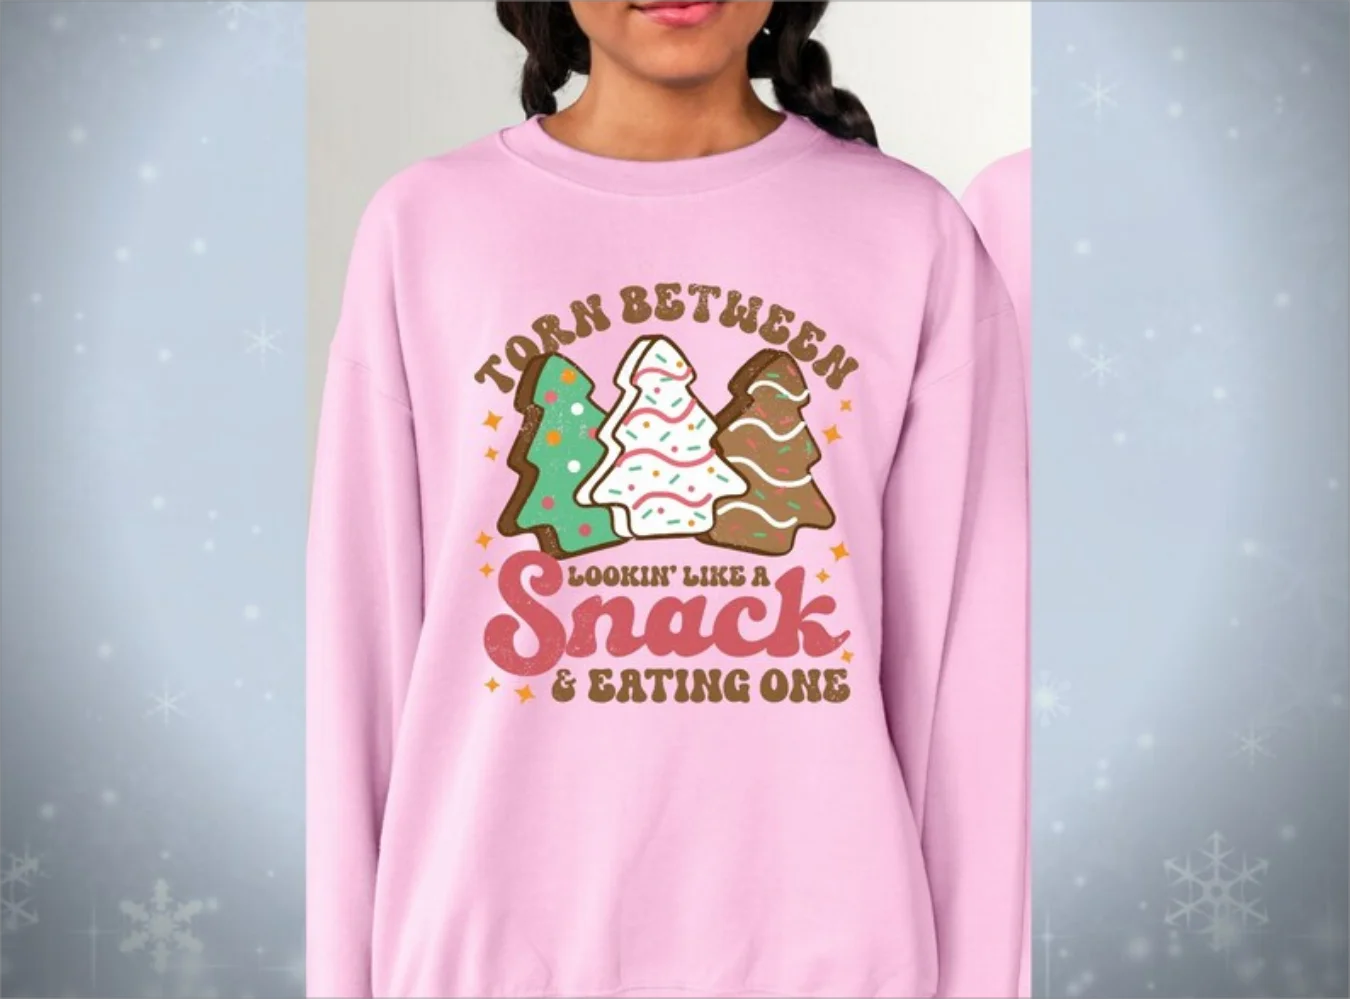 Torn Between Looking Like a Snack and Eating One Sweatshirt, Christmas Snack Cake Shirt, Cute Christmas Pullover Top